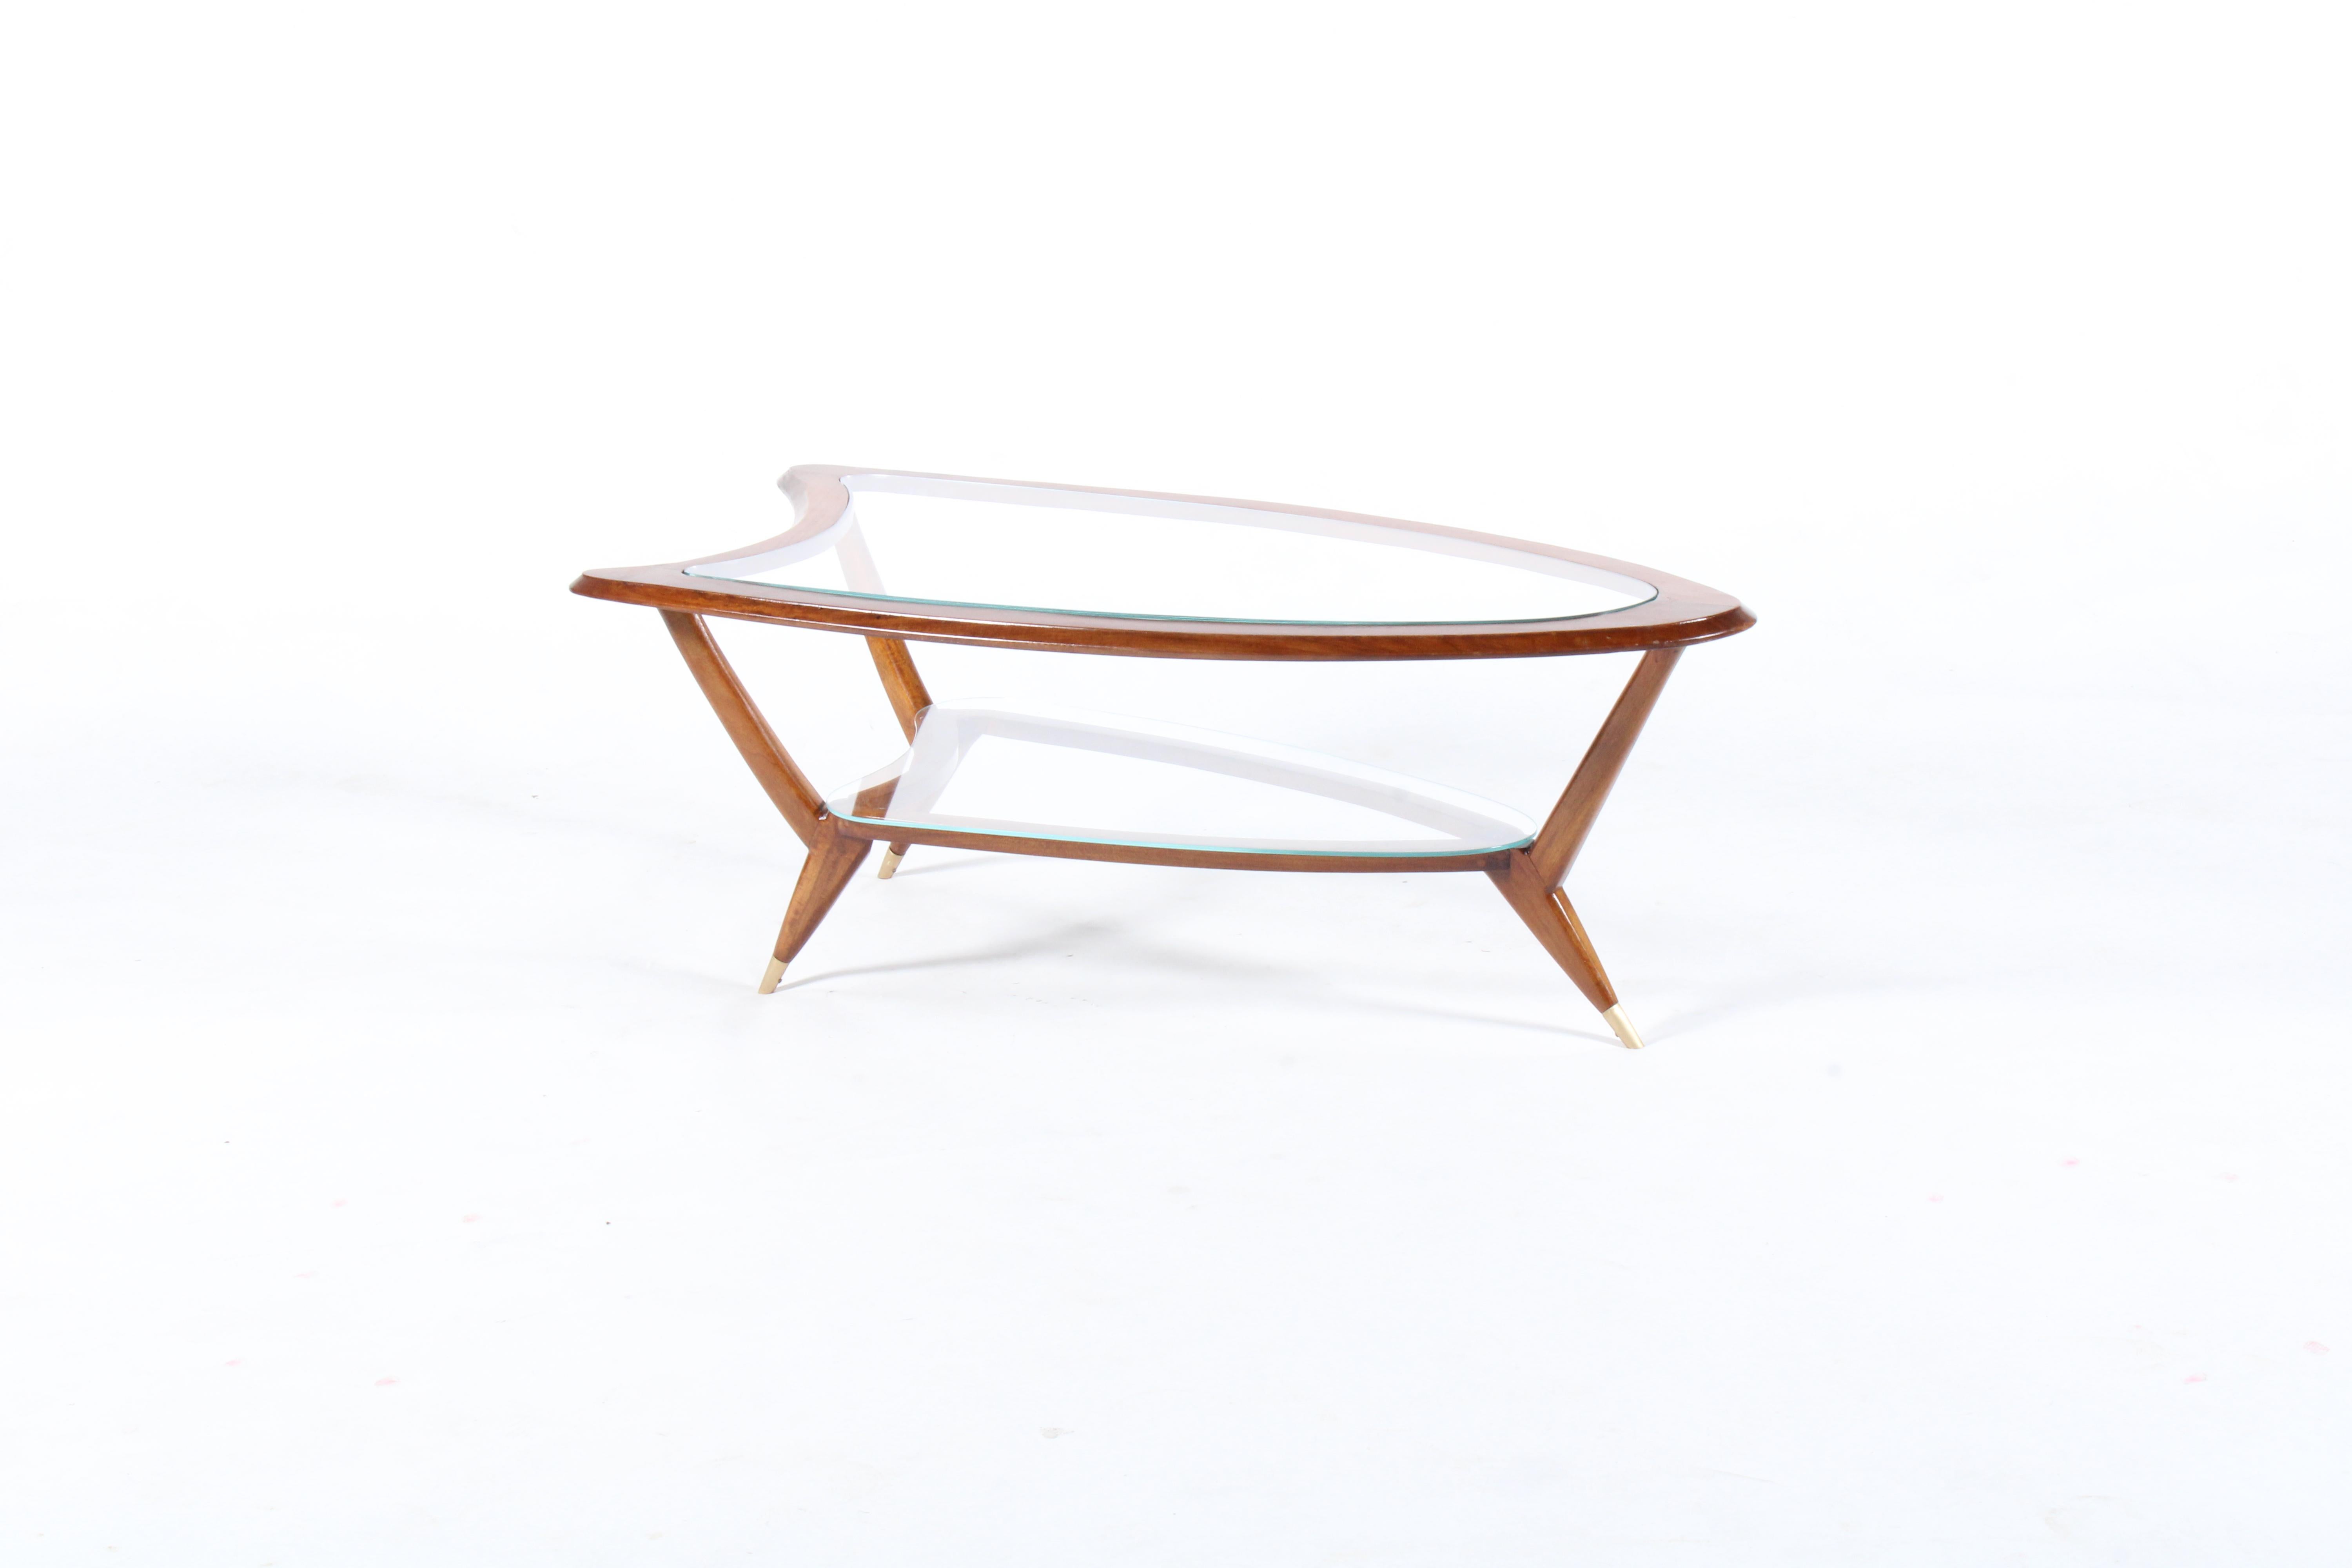 Stylish original mid century Italian coffee table in Santos Mahogany with inset glass top and shelf. This beautiful piece with soft curving lines and tapered legs with brass toe detailing is of pure mid century Italian design form and as well as